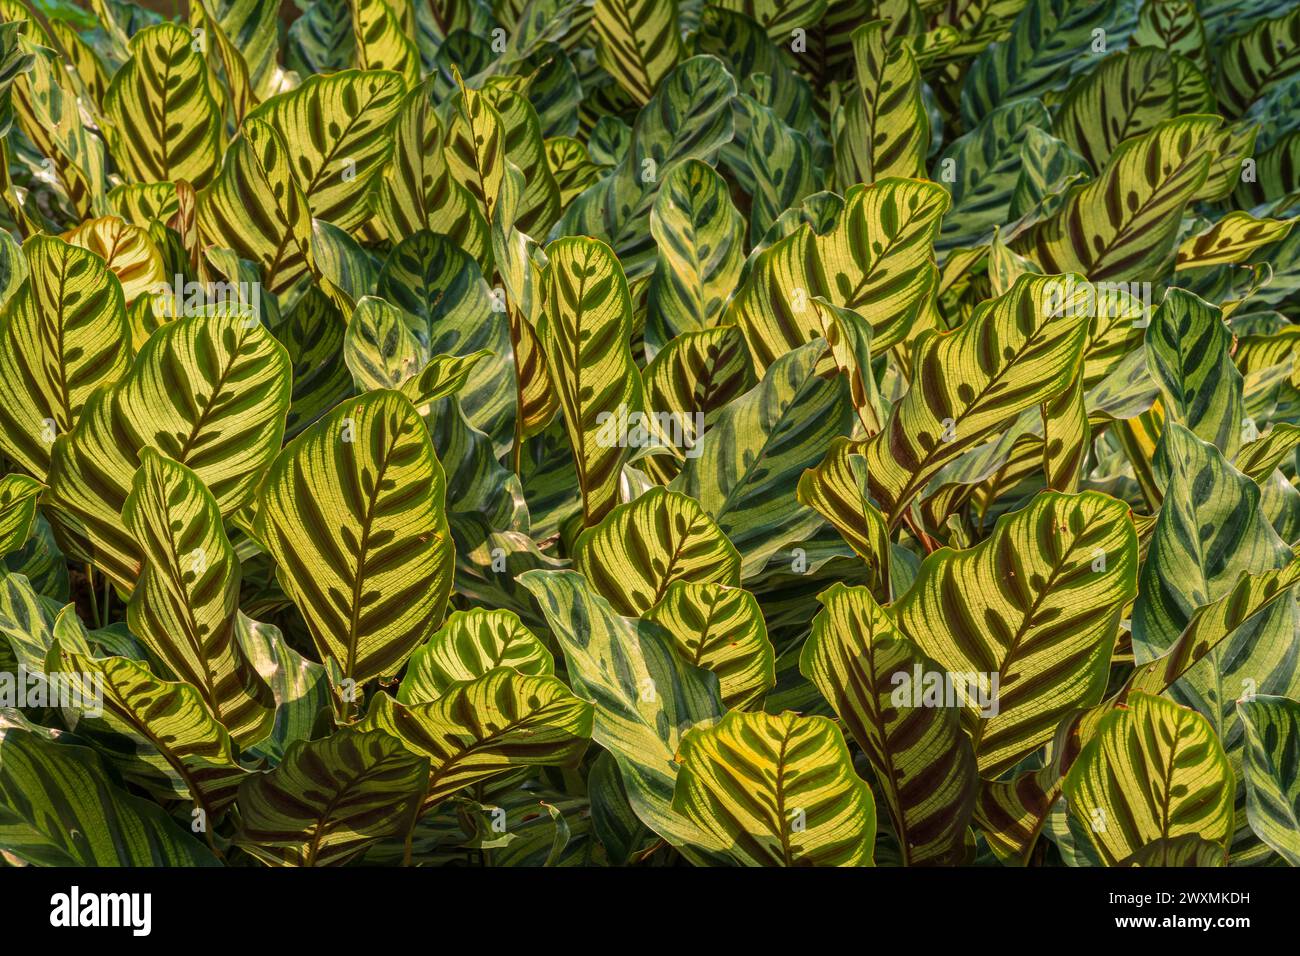 Colorful view of the decorative leaves of goeppertia makoyana aka calathea makoyana, peacock plant or cathedral windows in natural sunlight Stock Photo